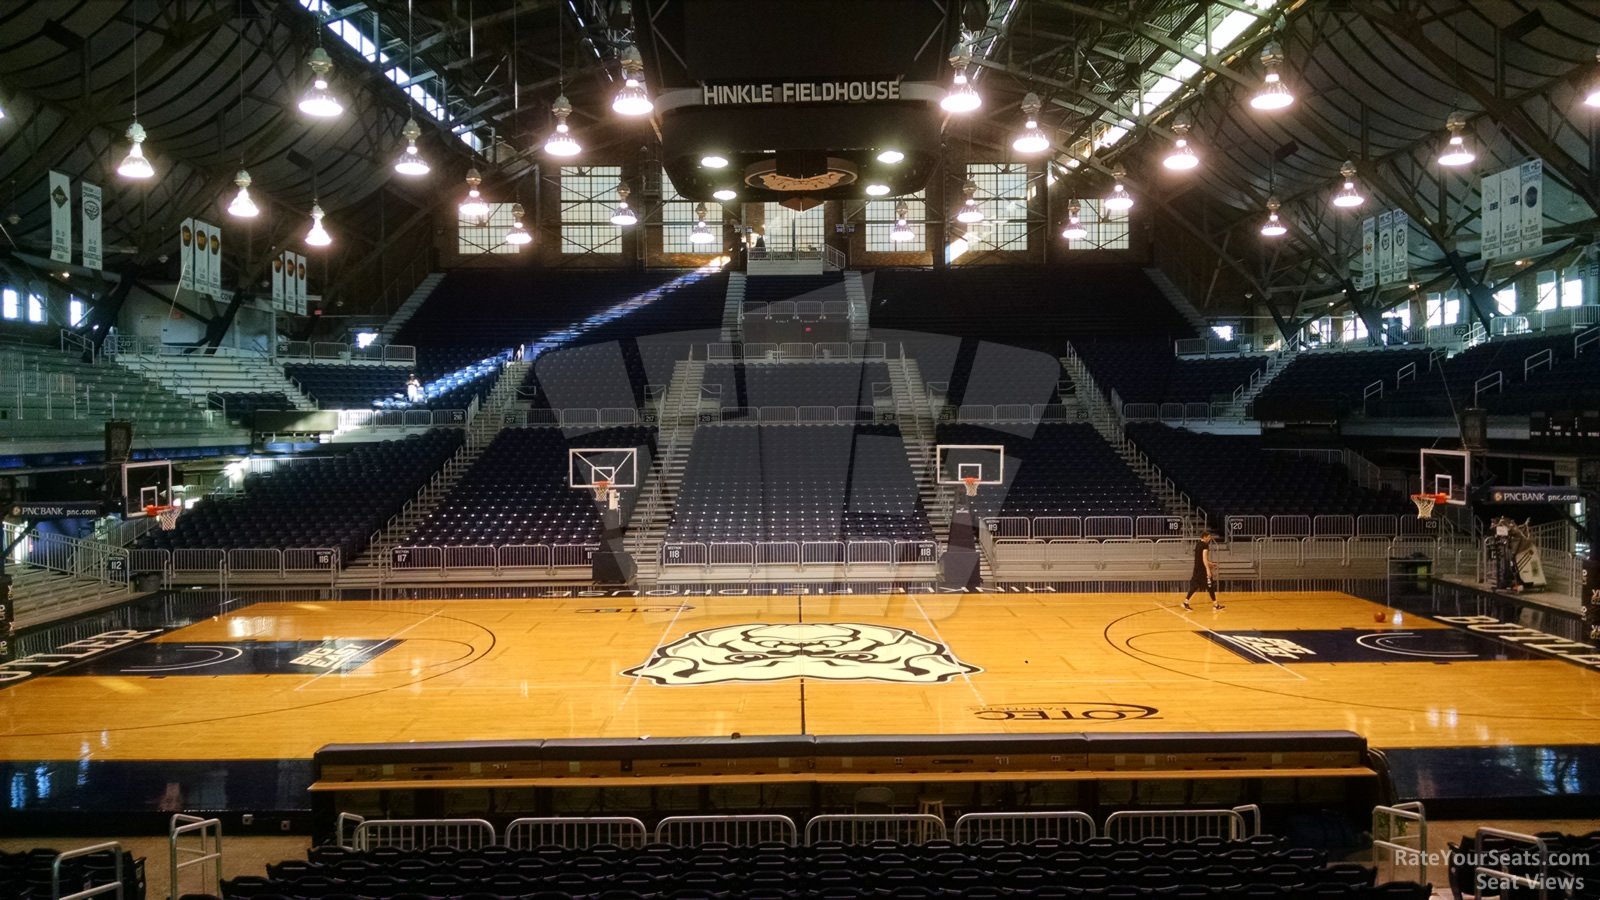 section 106, row 15 seat view  - hinkle fieldhouse